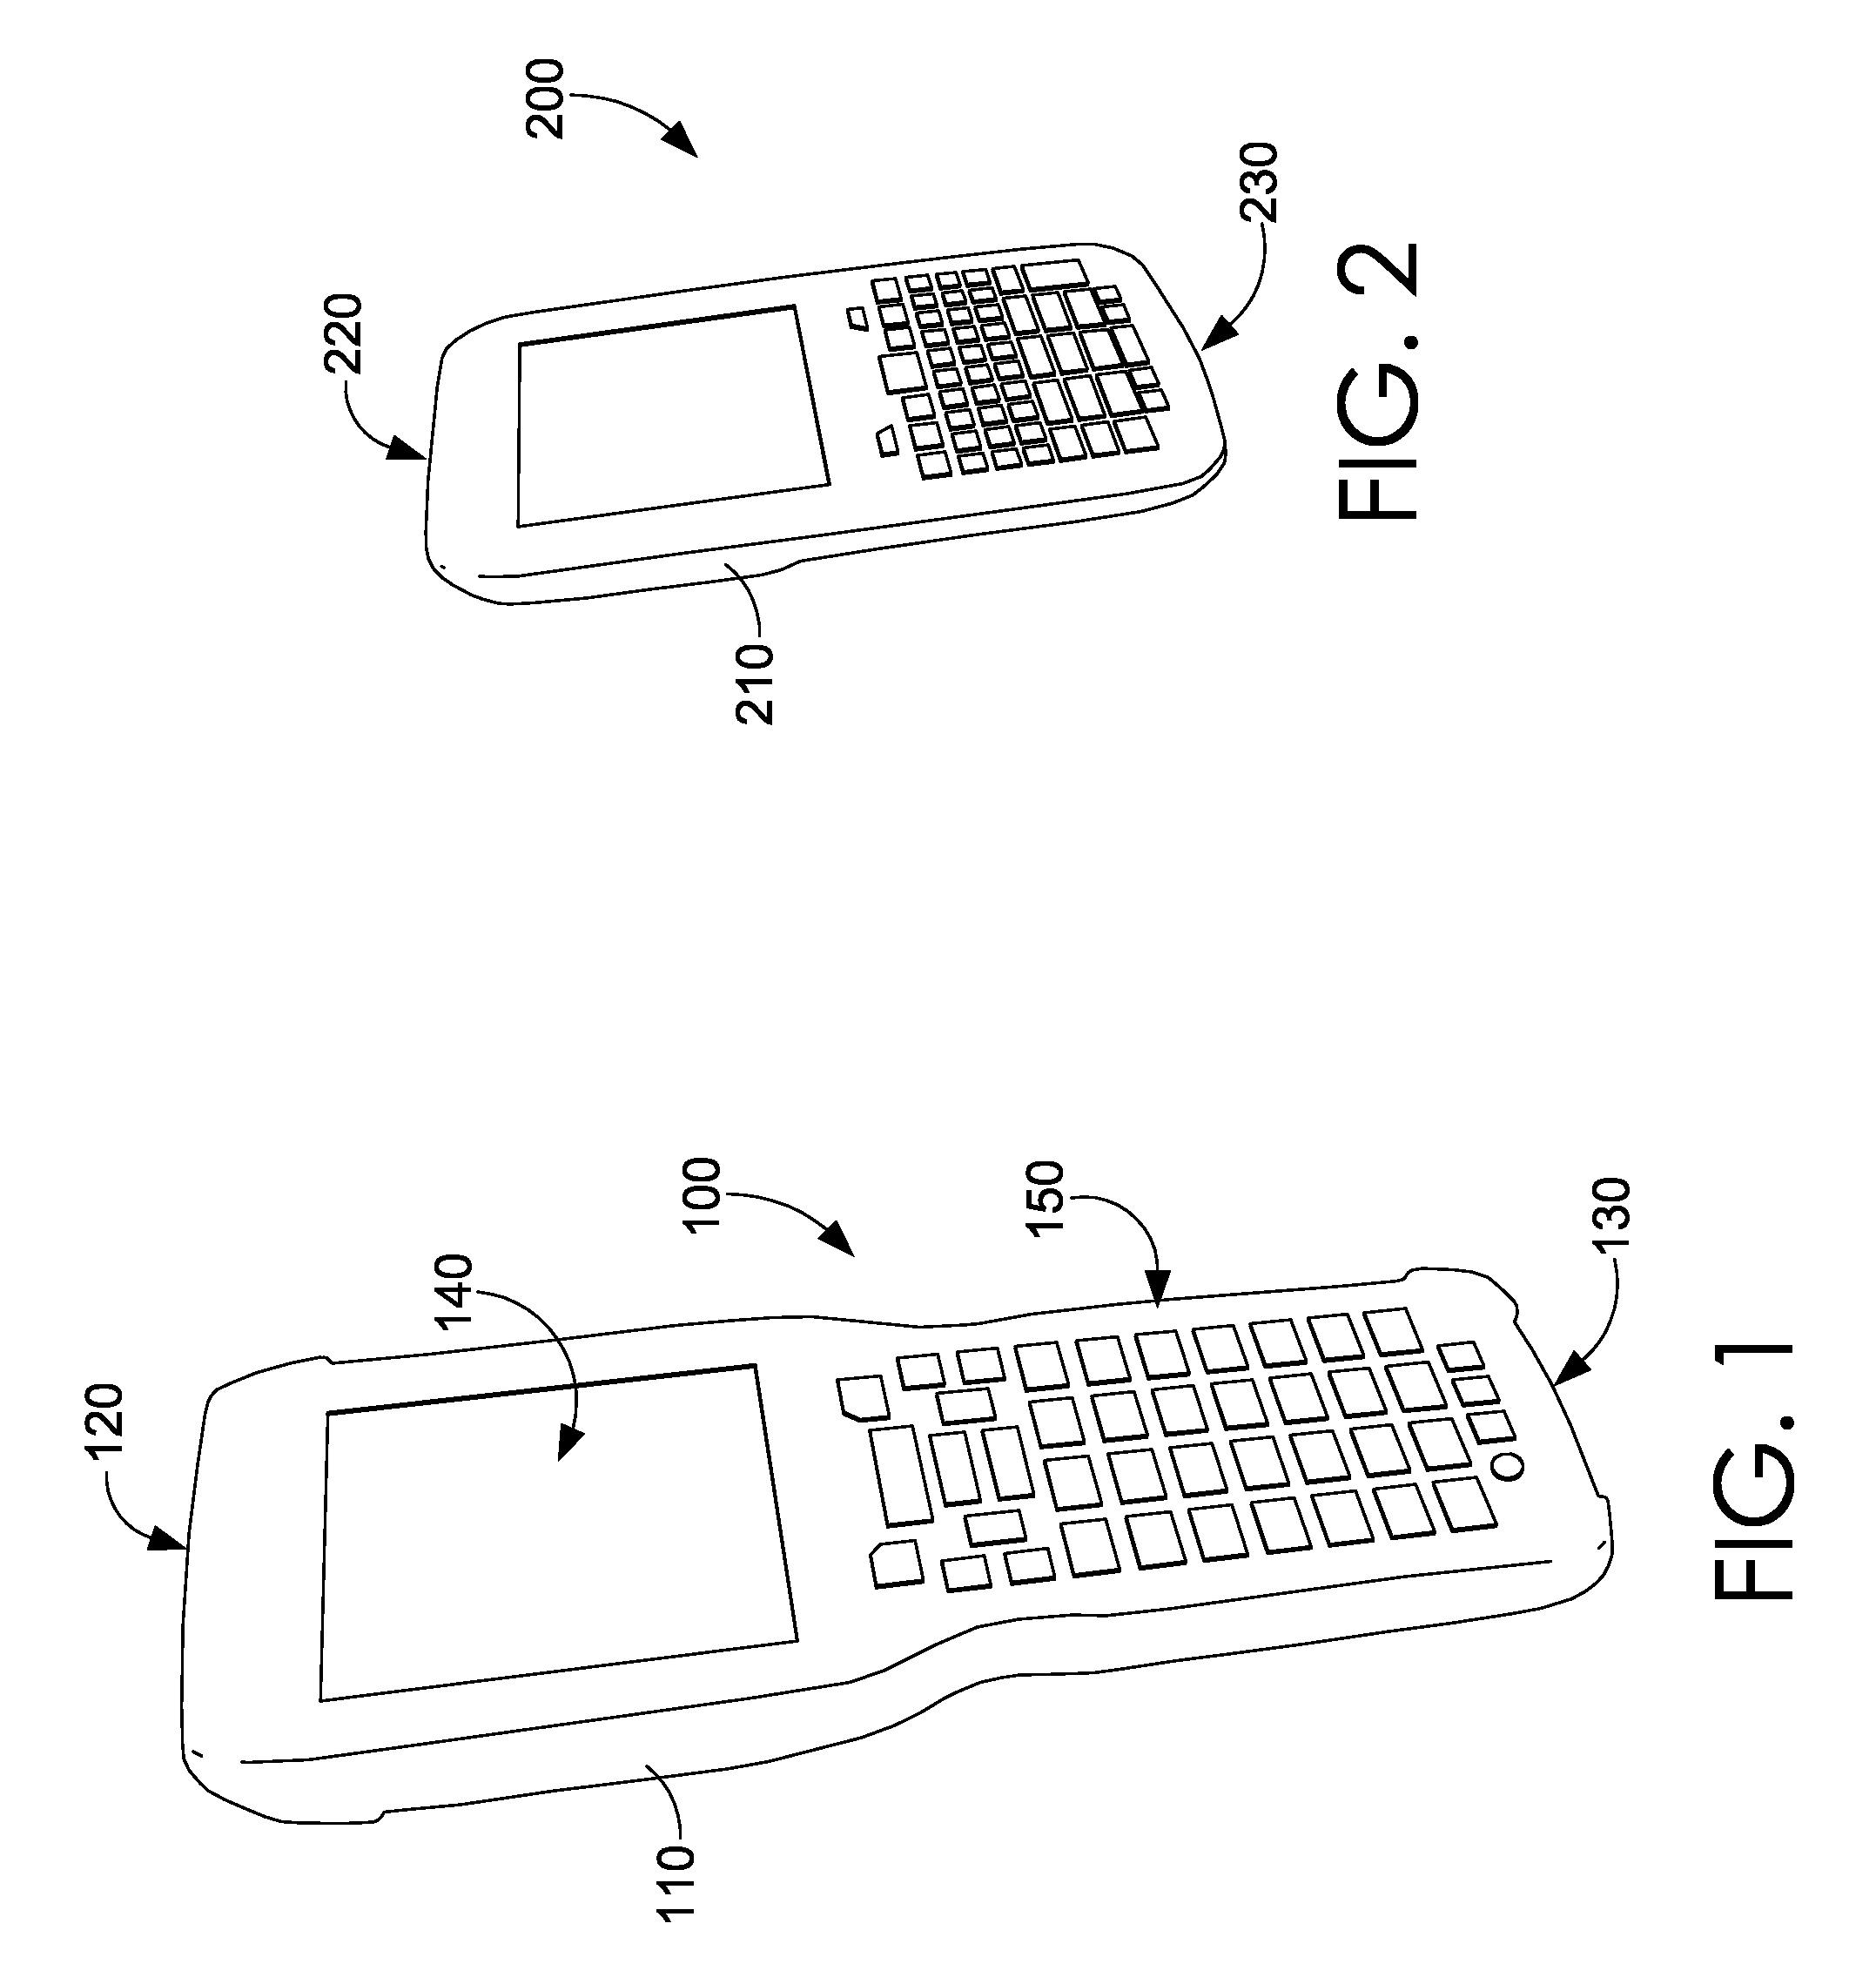 Snap-on module for selectively installing receiving element(s) to a mobile device